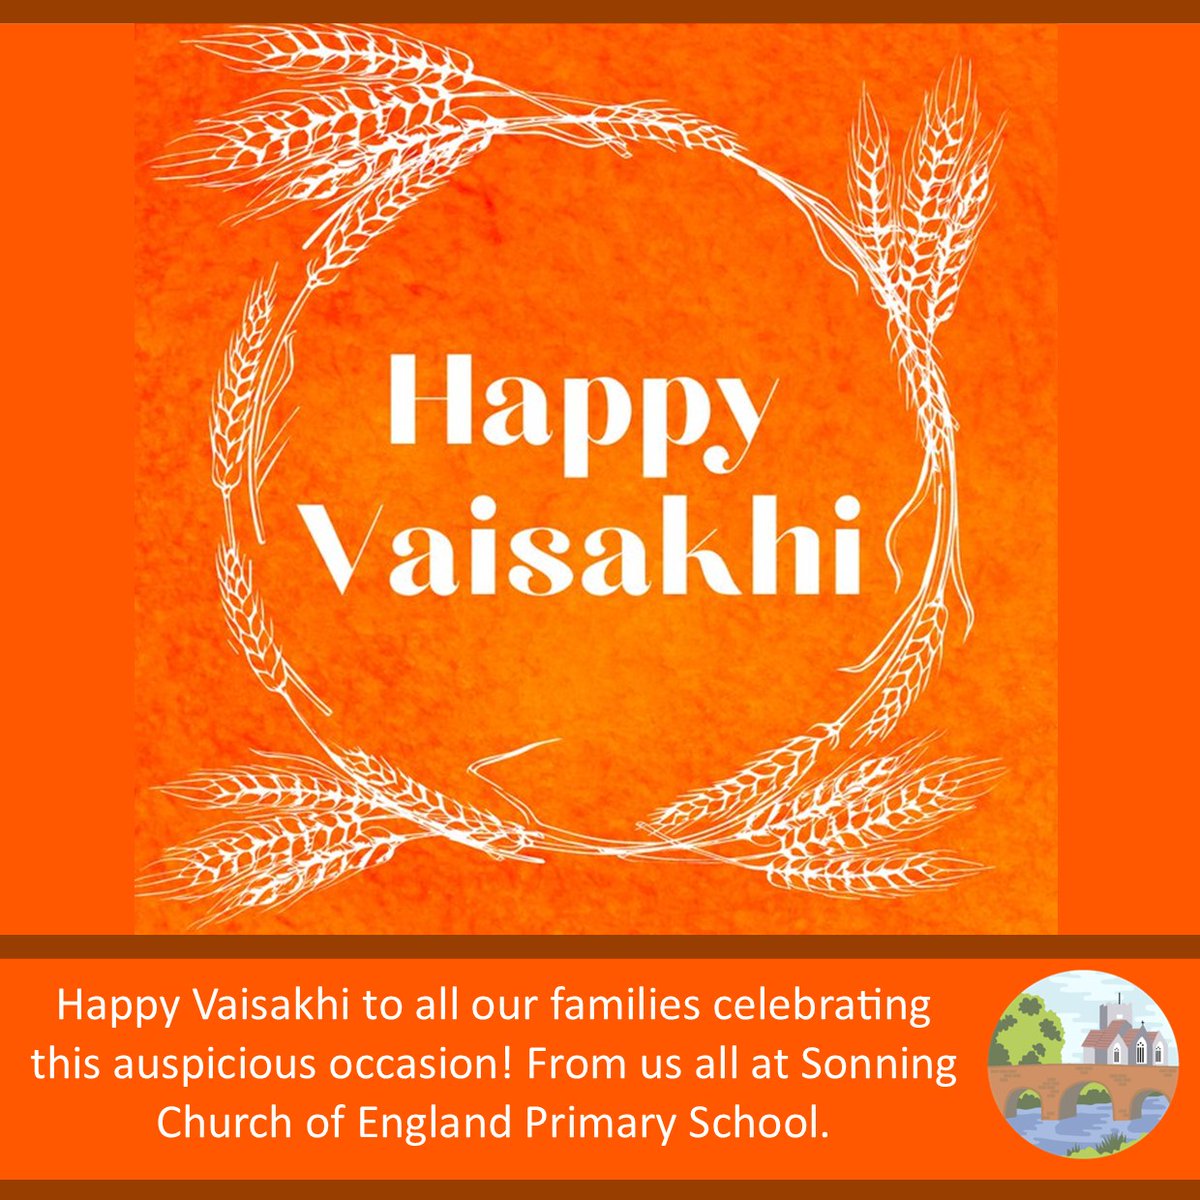 Happy Vaisakhi to all those celebrating this weekend :) #SchoolValueLOVE #BuildingStrongFoundationsForTheYearsAhead